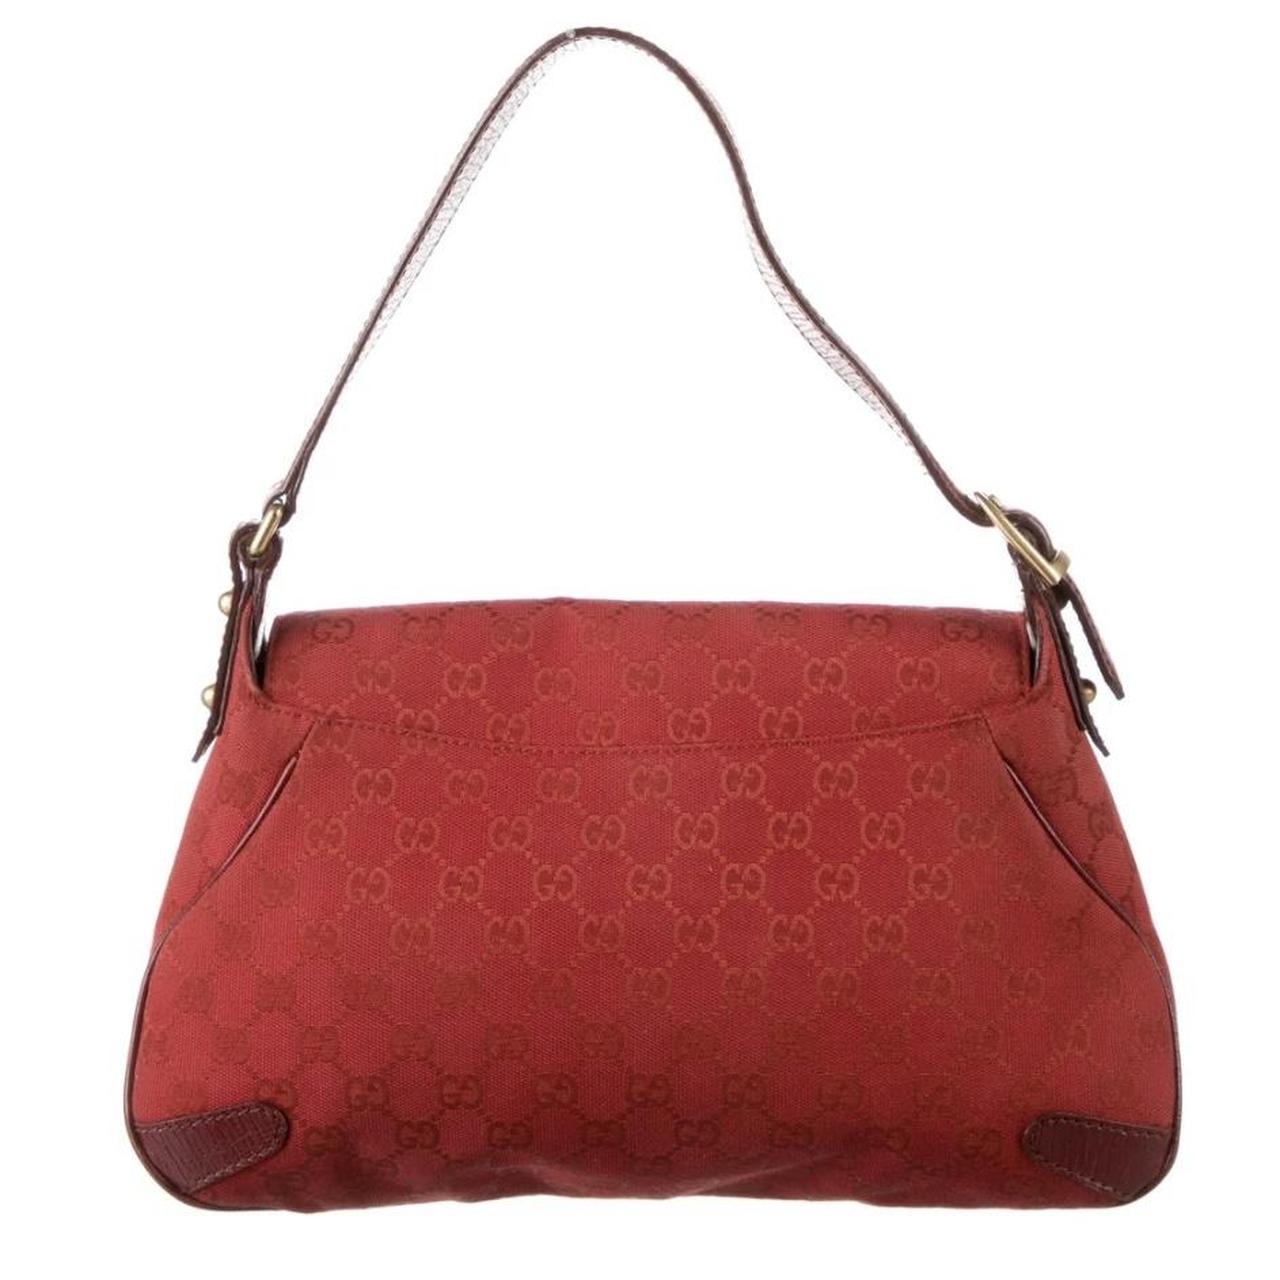 Gucci Women's Red and Gold Bag (2)